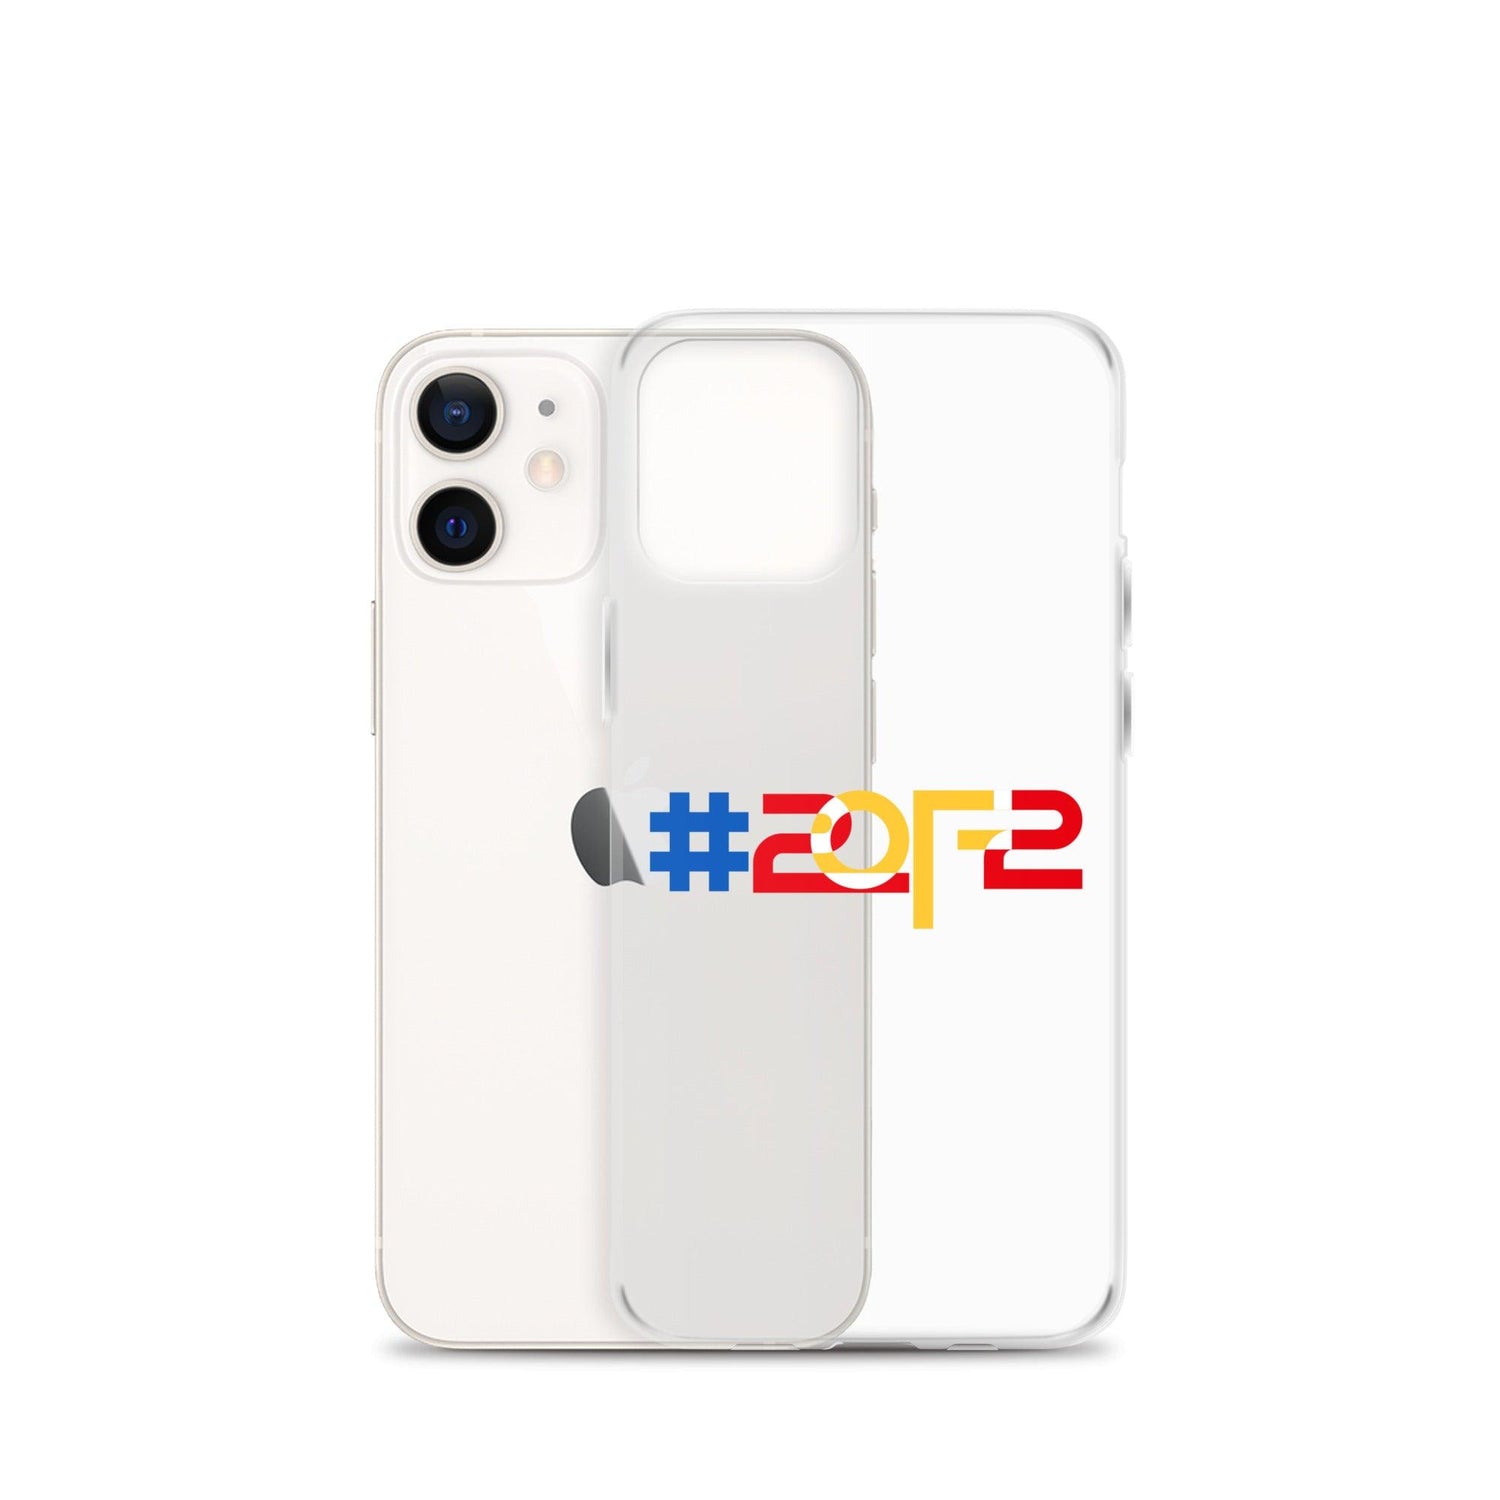 Cobee Bryant "2 of 2" iPhone Case - Fan Arch